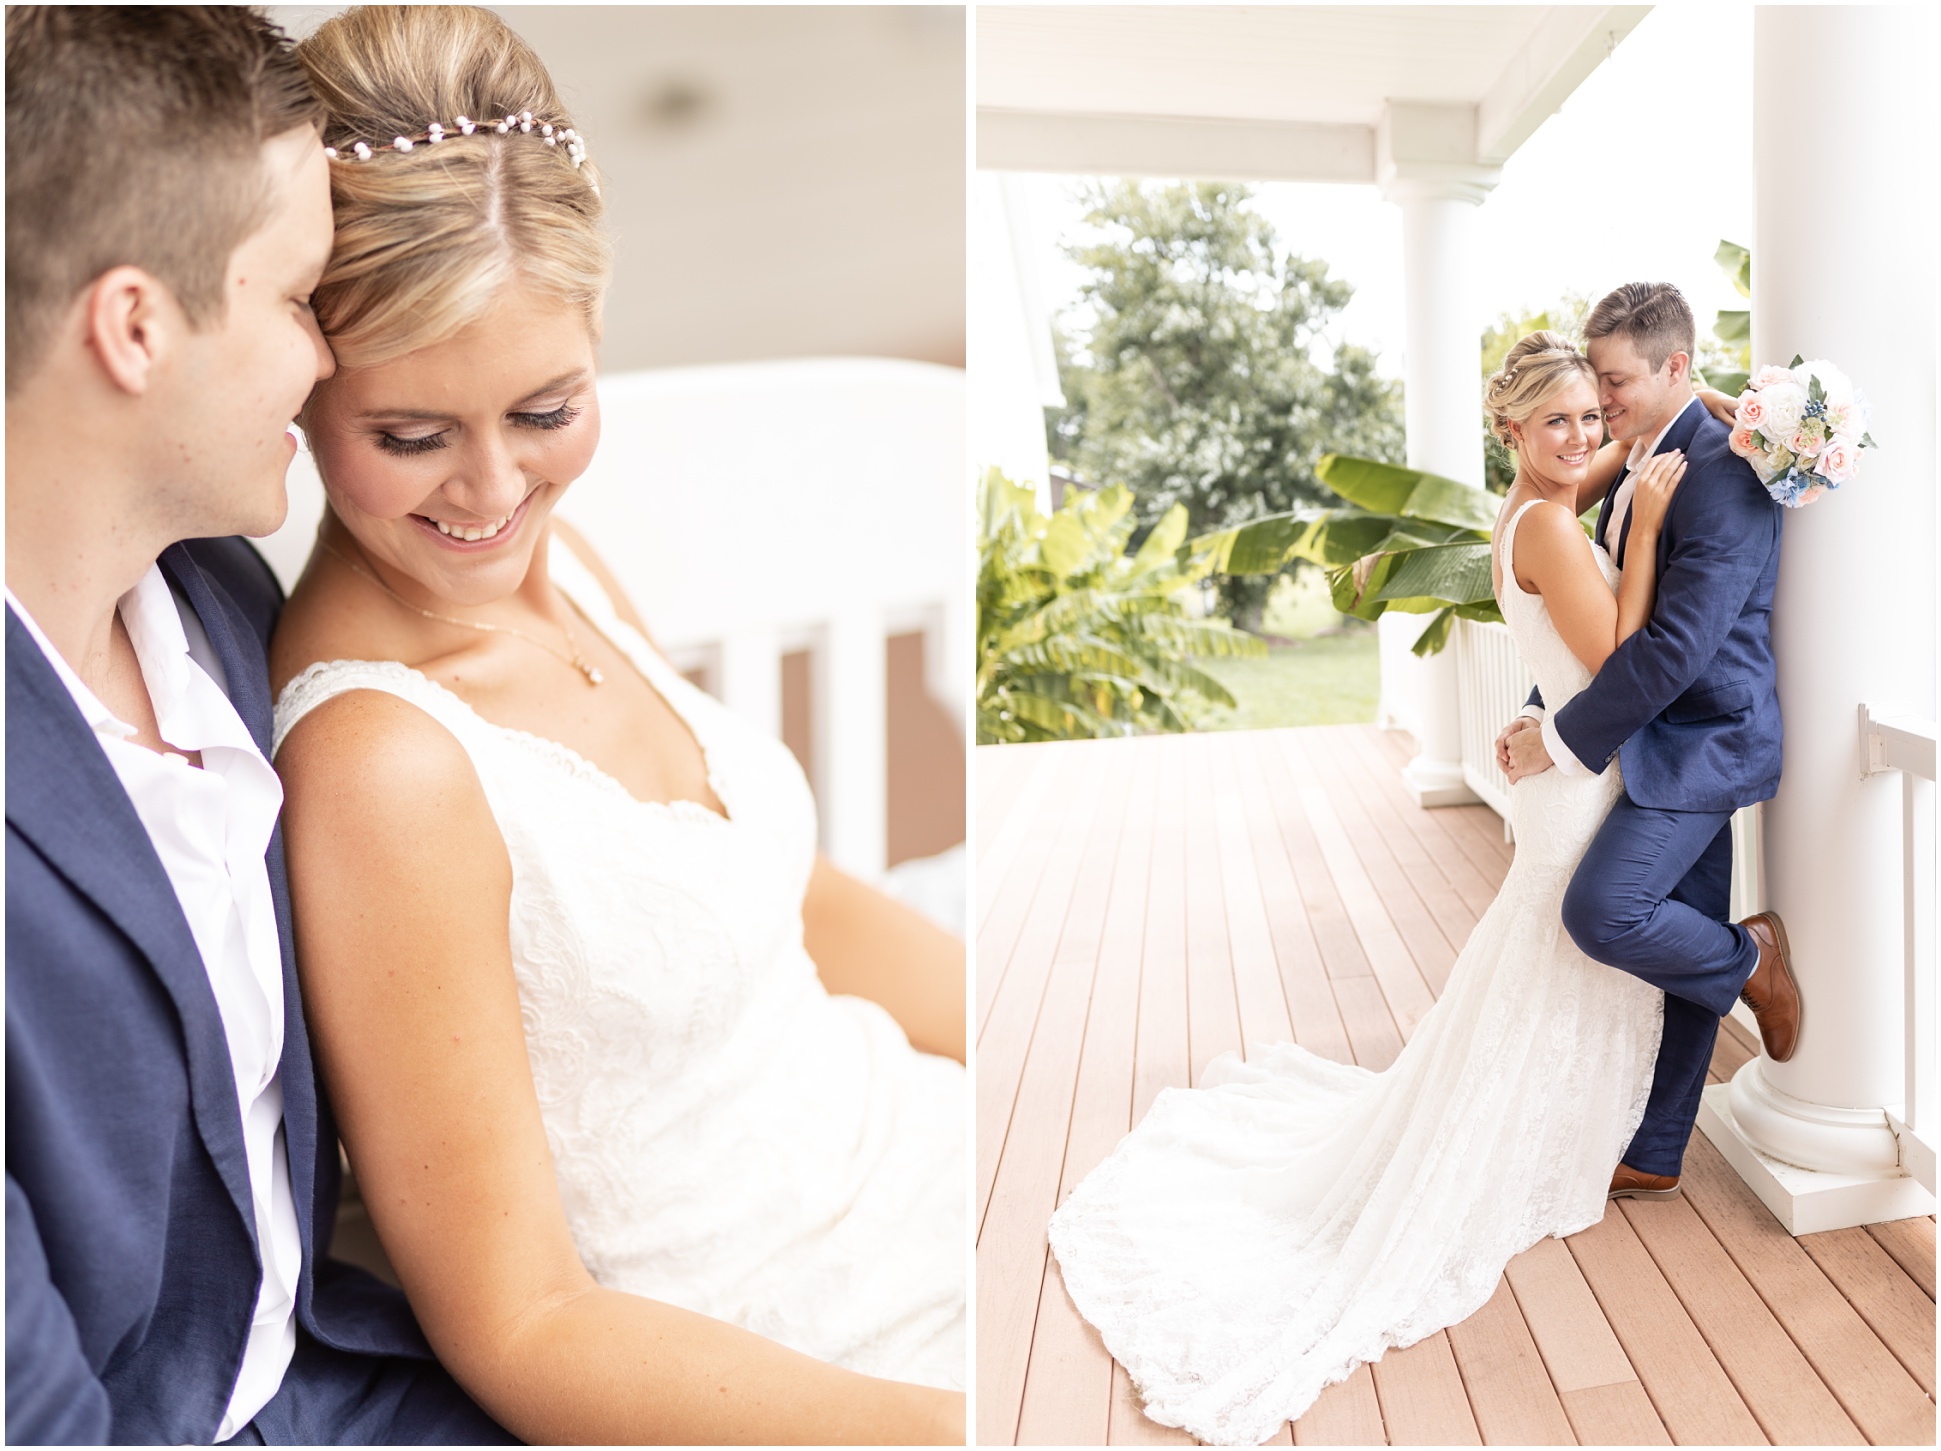 Two images of the bride and groom. One is up close and one is full body